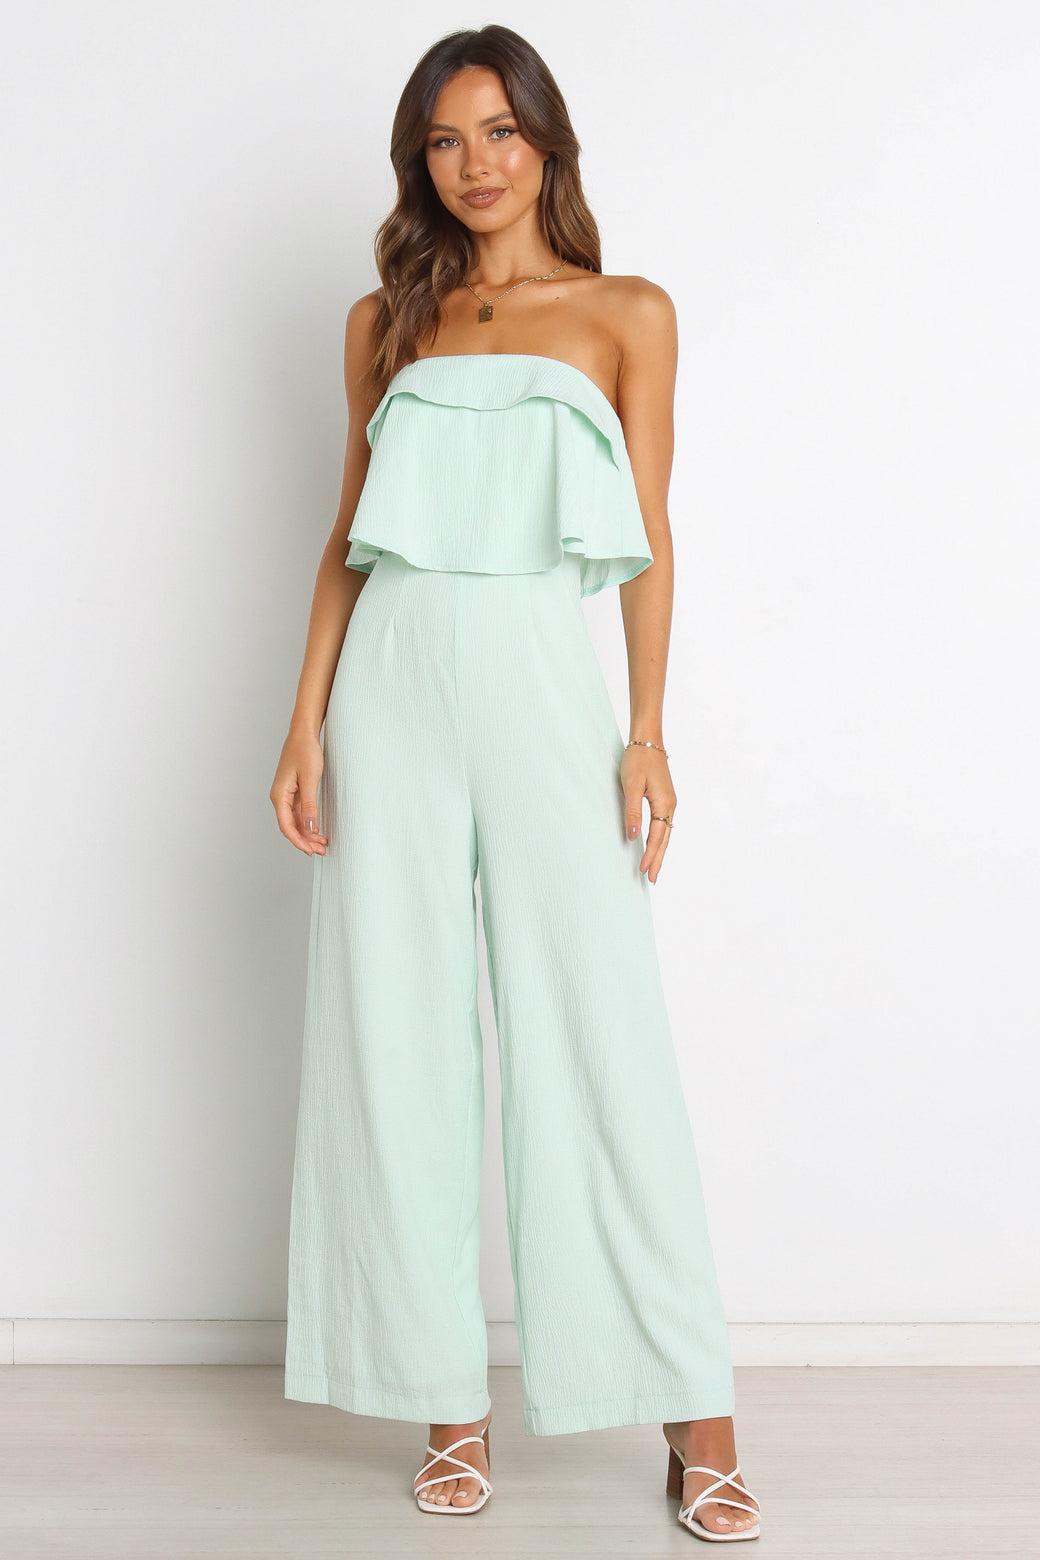 10 Best Wedding Guest Trousers Outfit Ideas for Women  FMagcom